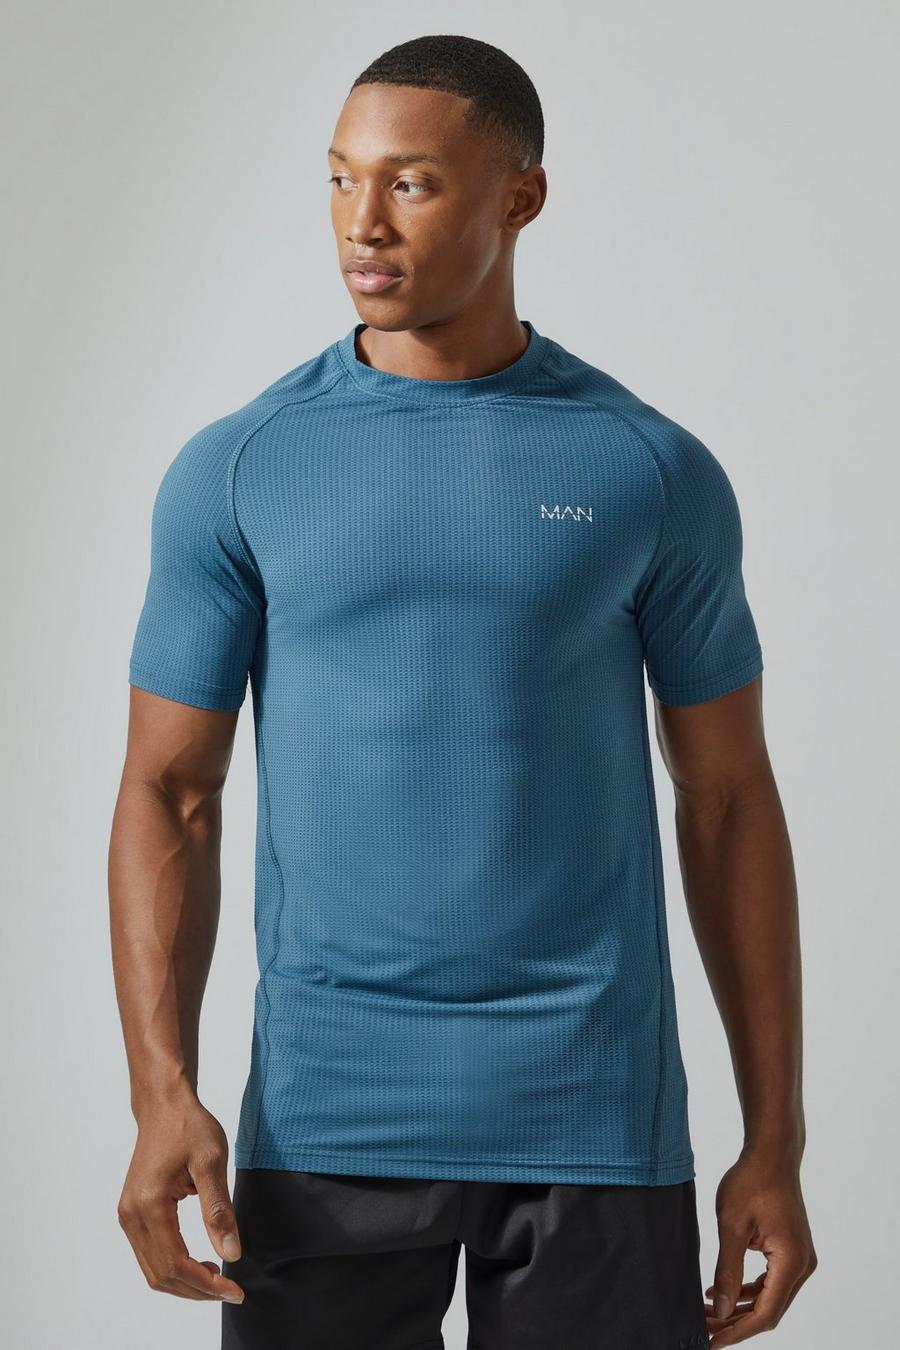 Teal Man Active Muscle Fit Marl T-shirt image number 1